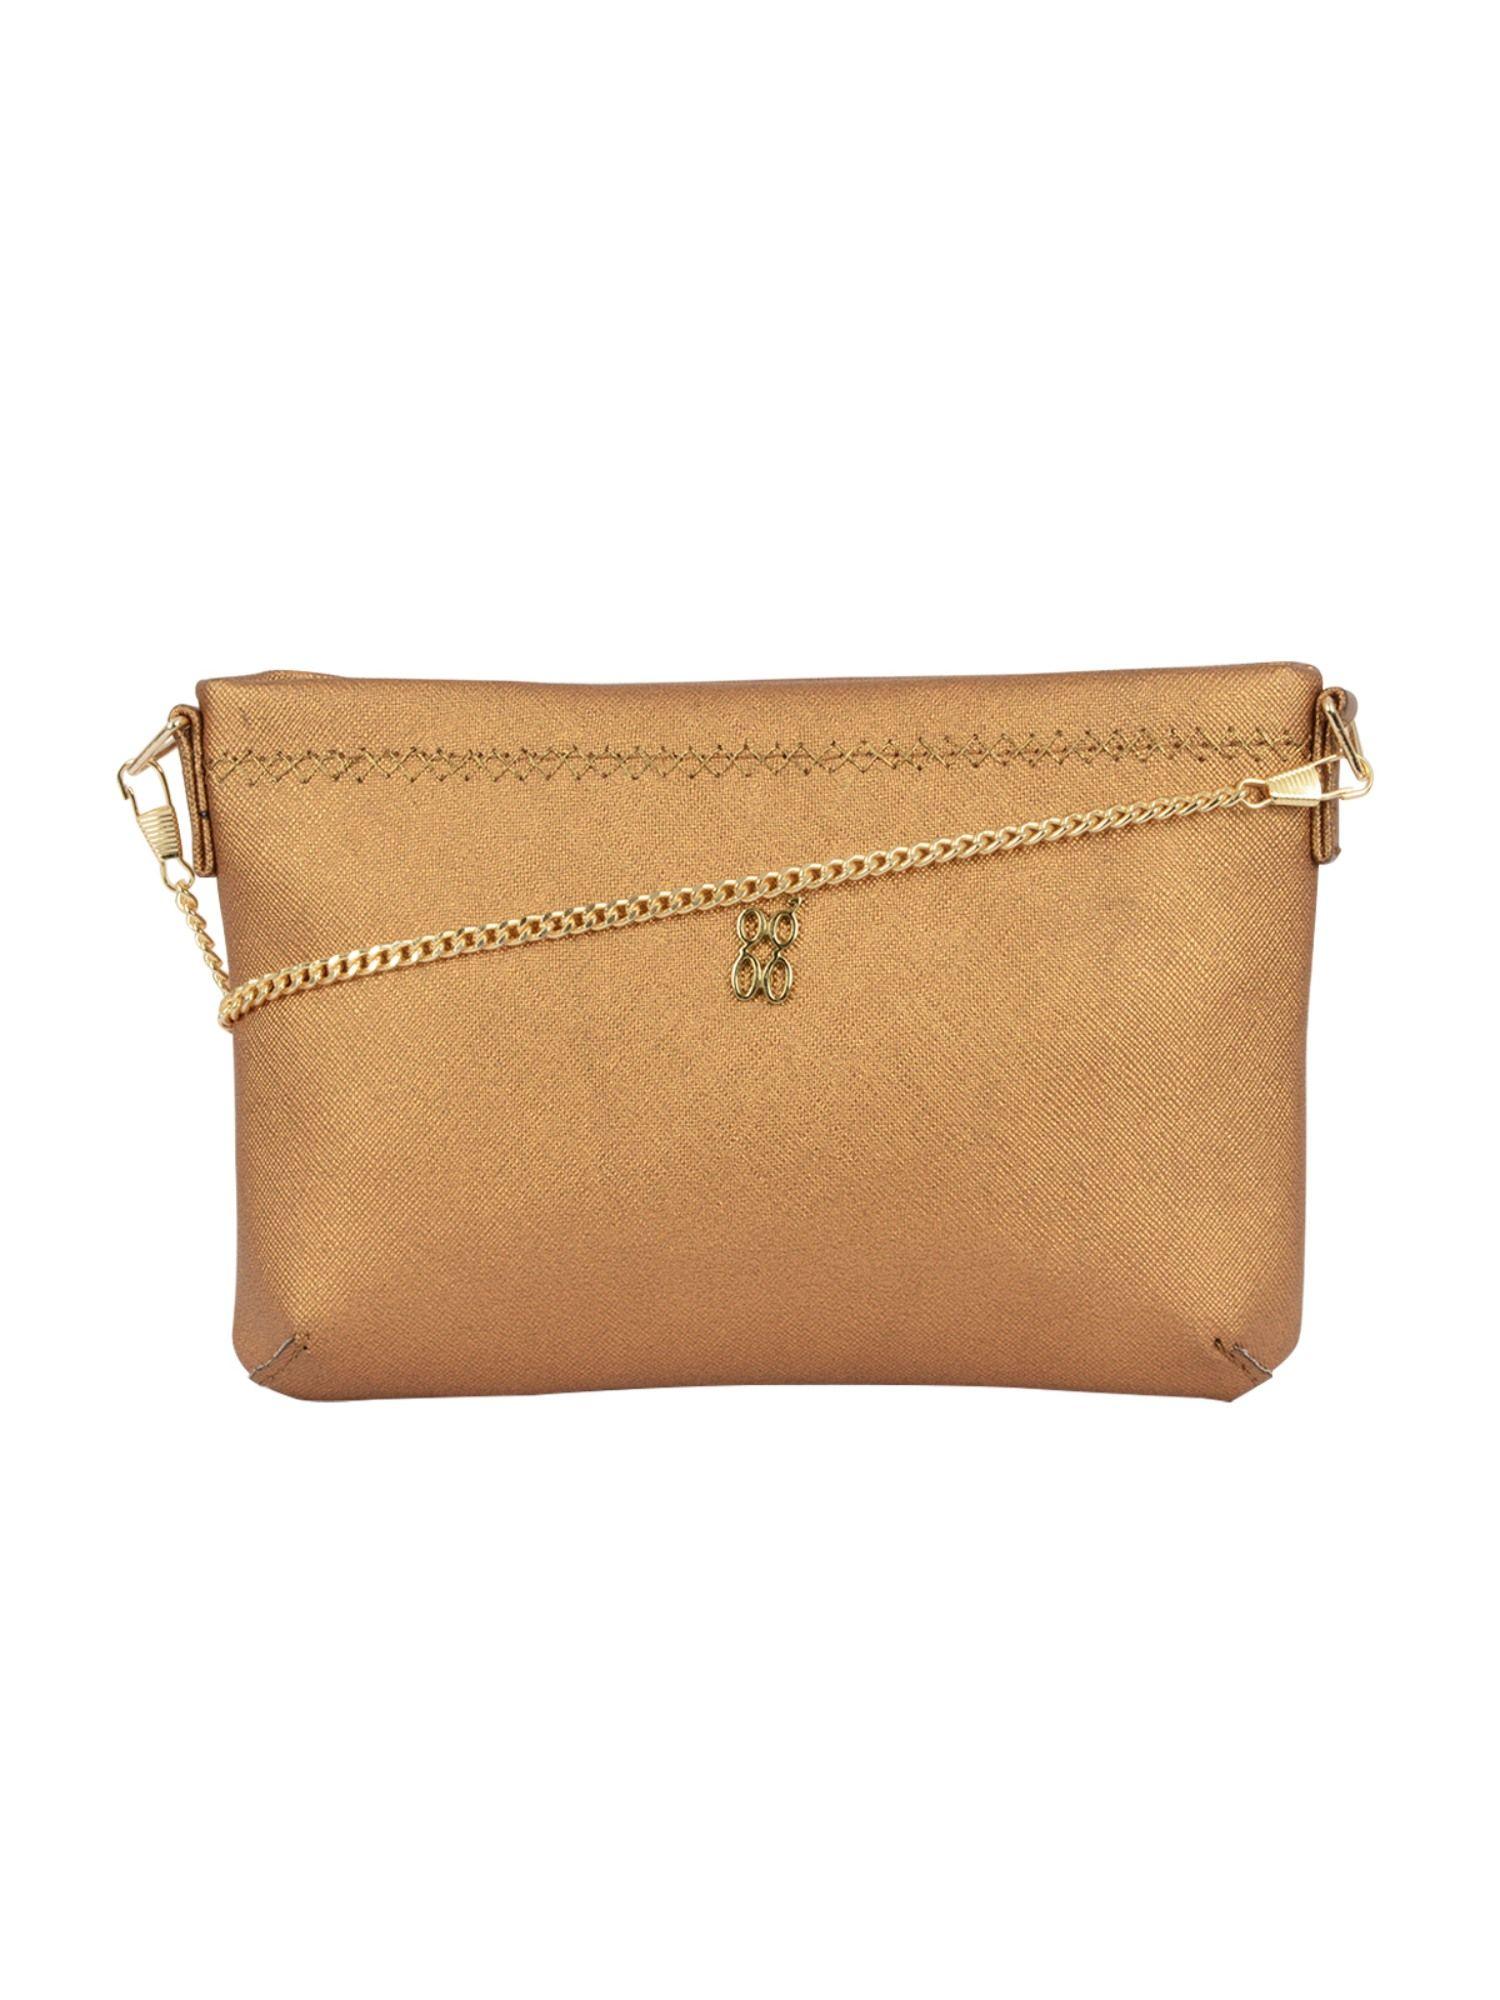 lxe browney 3t5 brown clutch with detachable sling strap